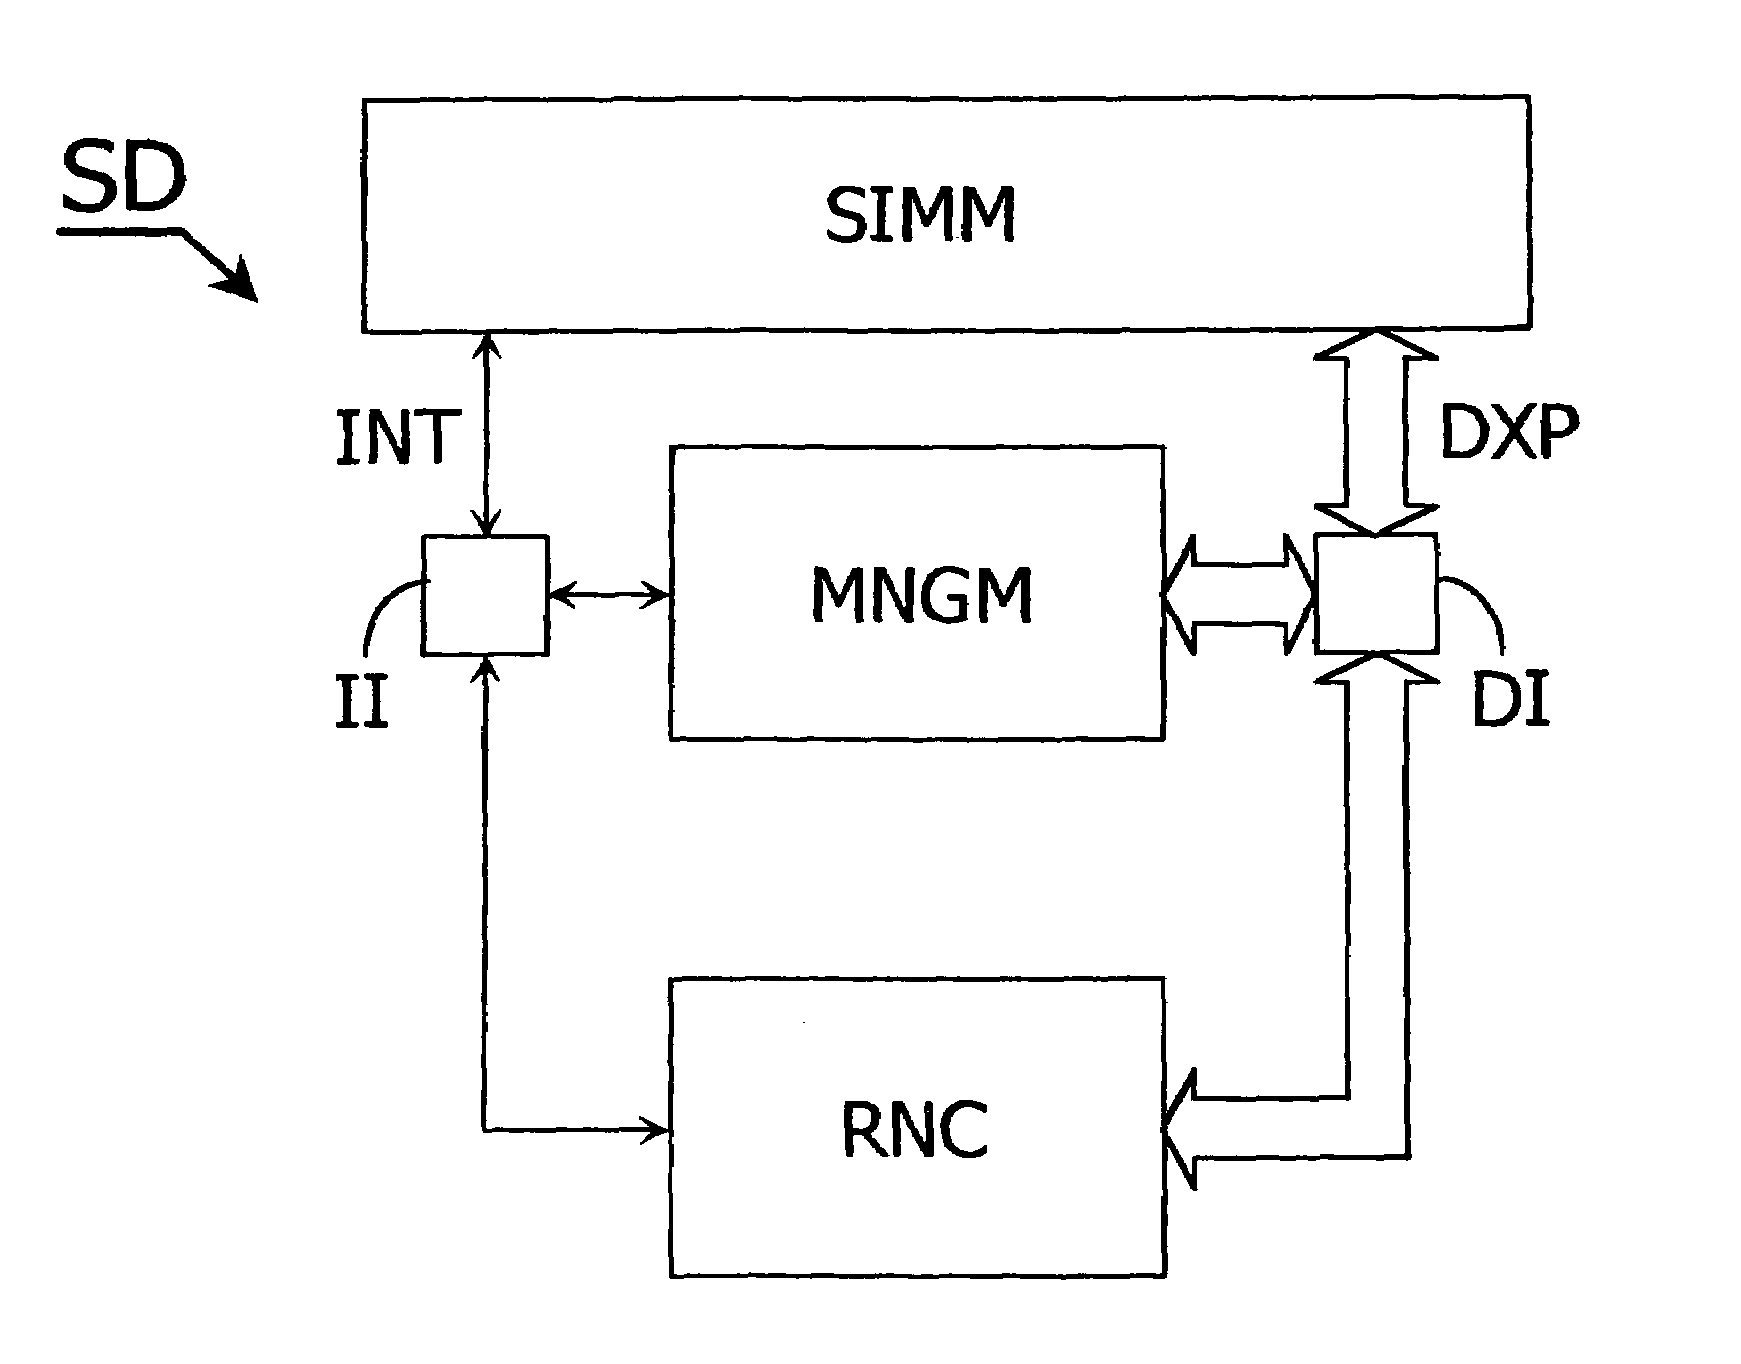 Method of simulating operating conditions of a telecommunication system requiring a limited amount of computing power